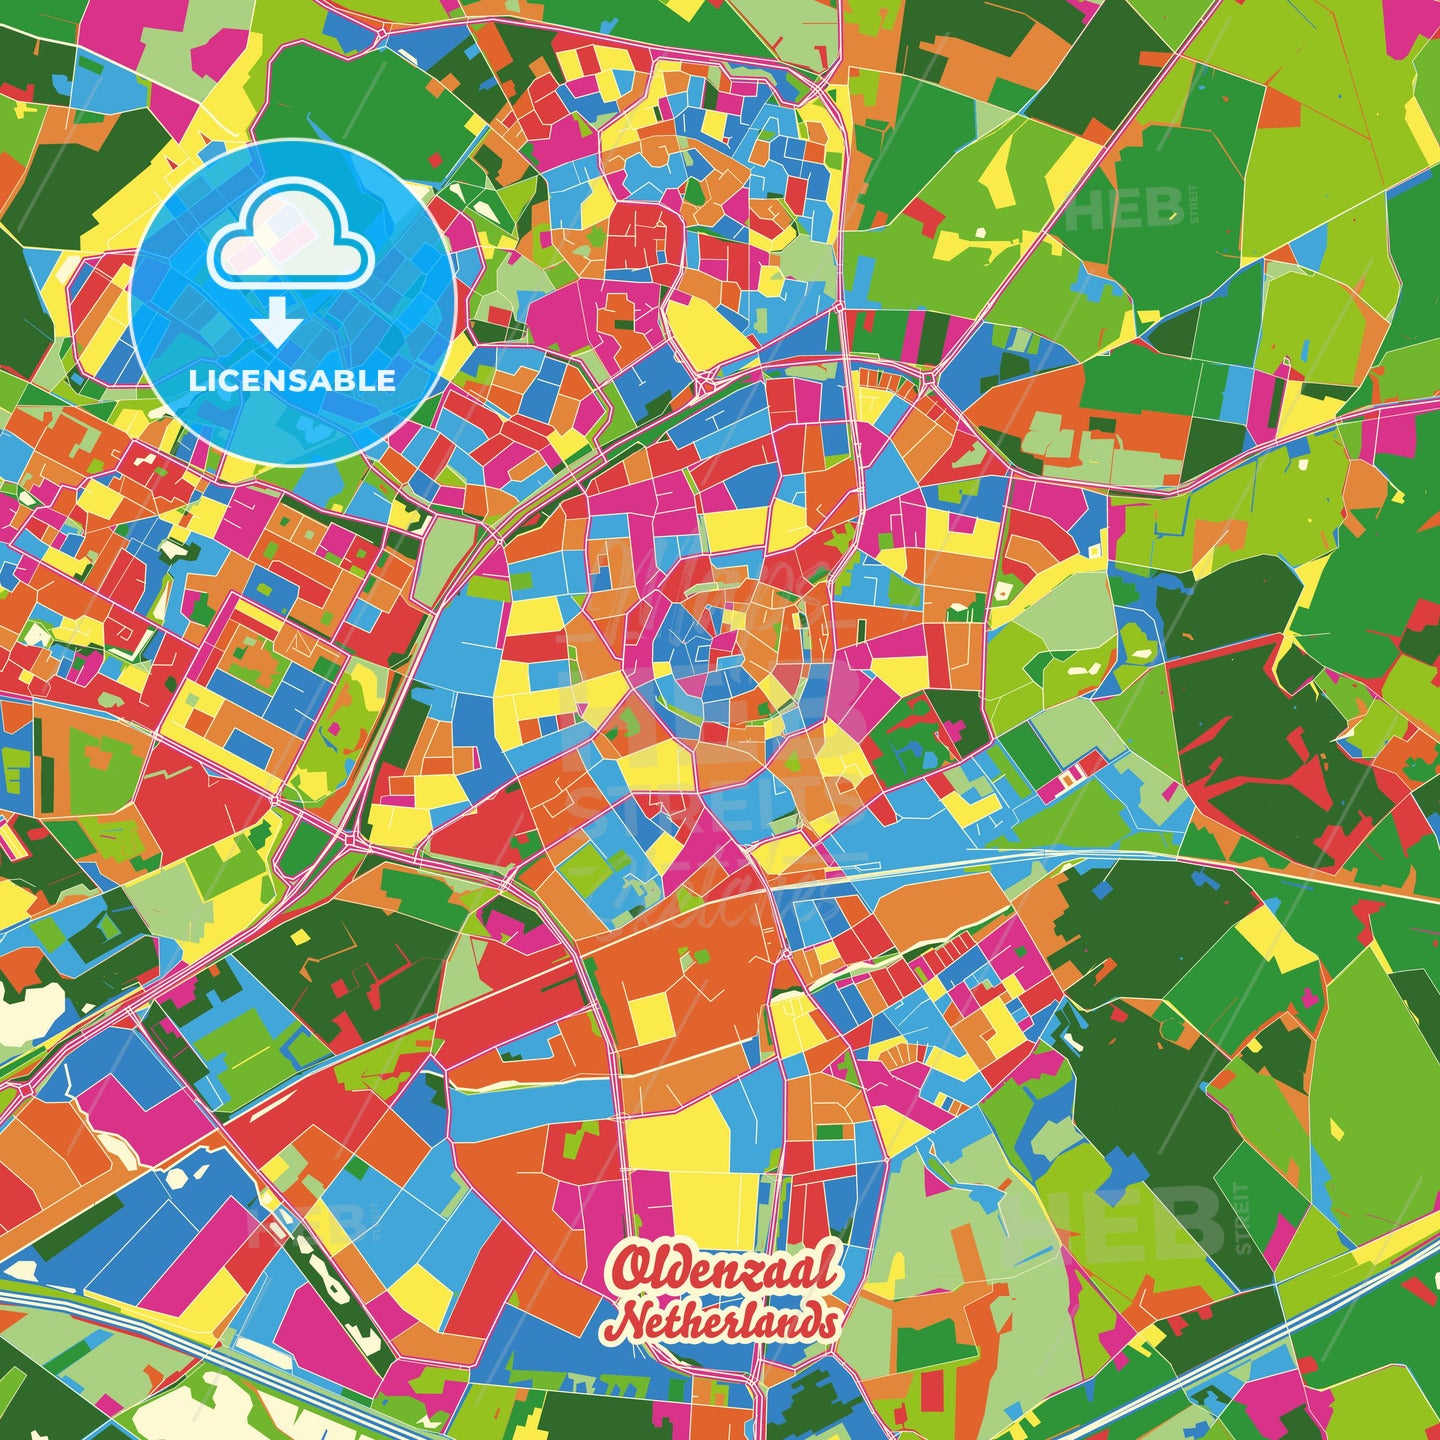 Oldenzaal, Netherlands Crazy Colorful Street Map Poster Template - HEBSTREITS Sketches